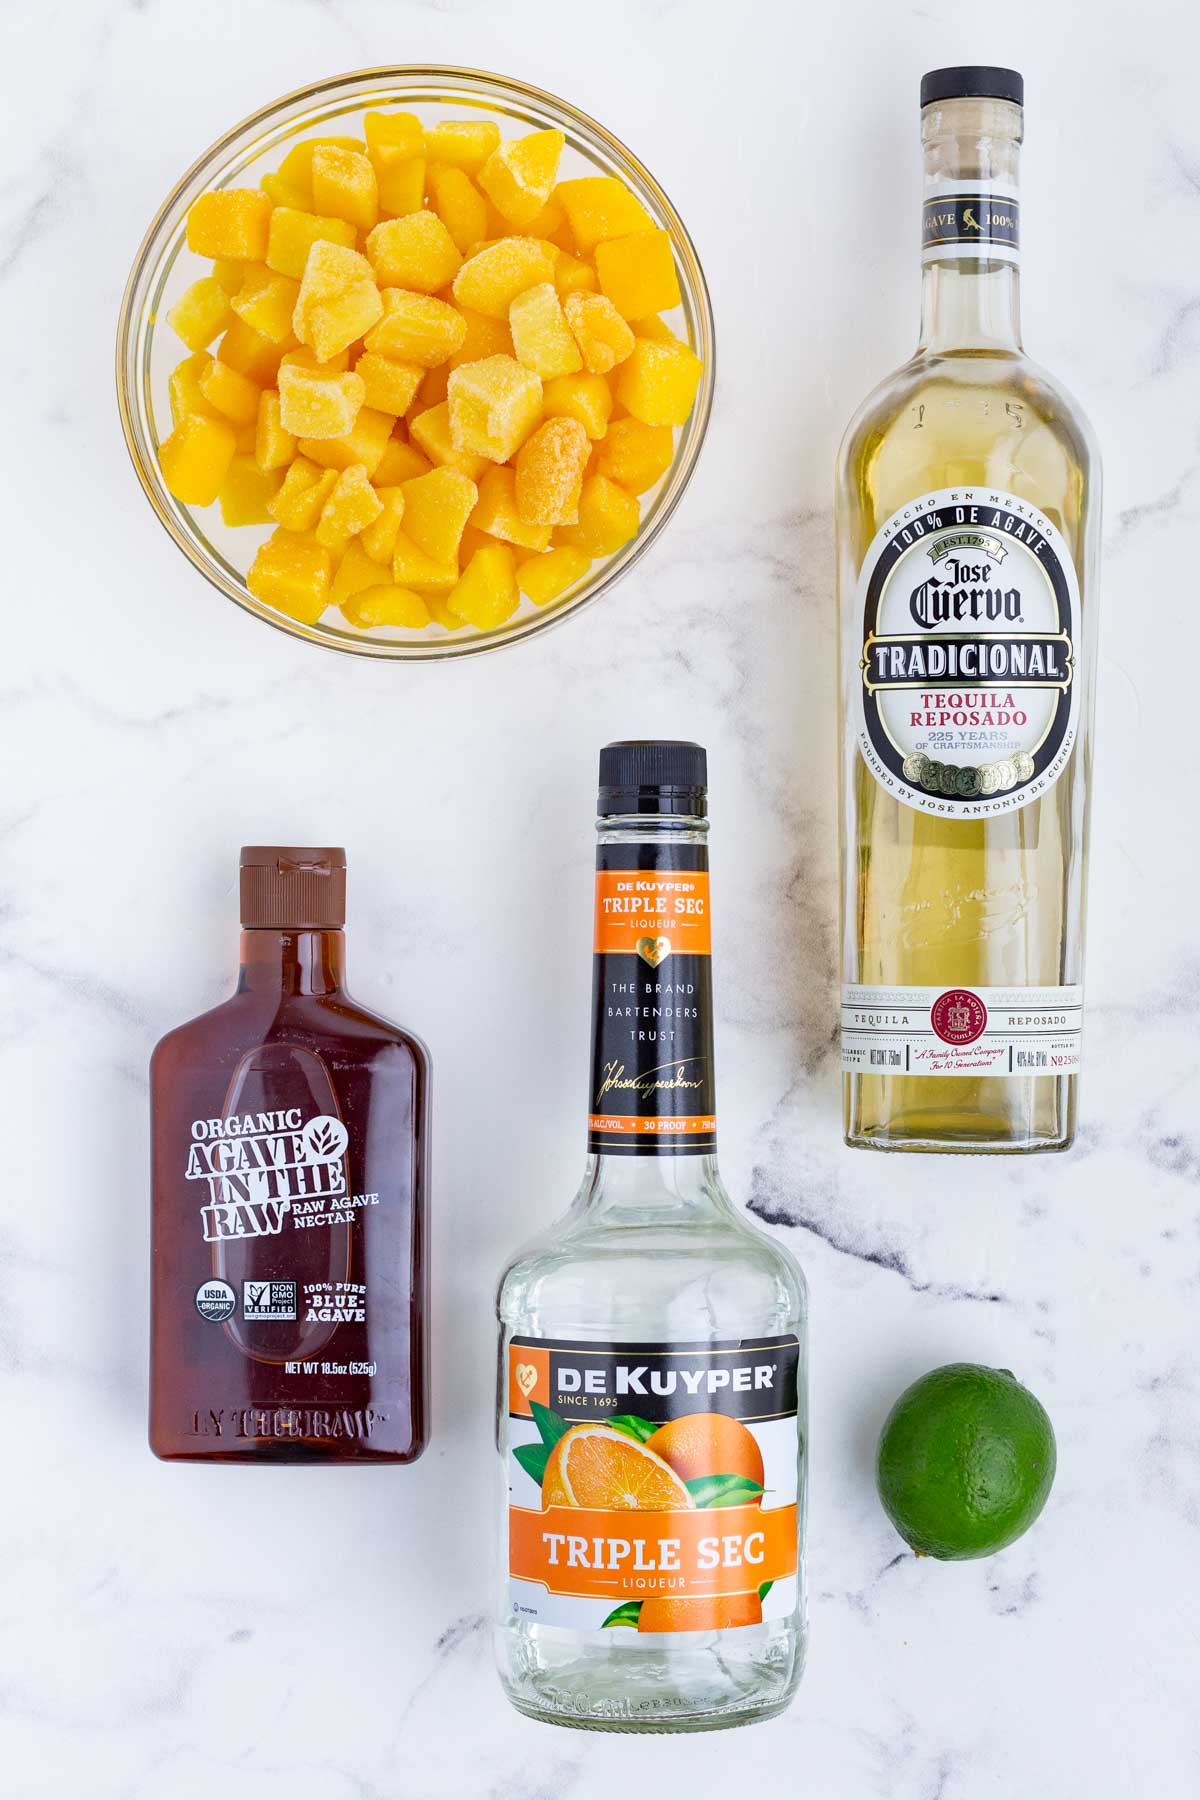 Tequila, triple sec, mango, lime juice, and agave are the ingredients for this drink.